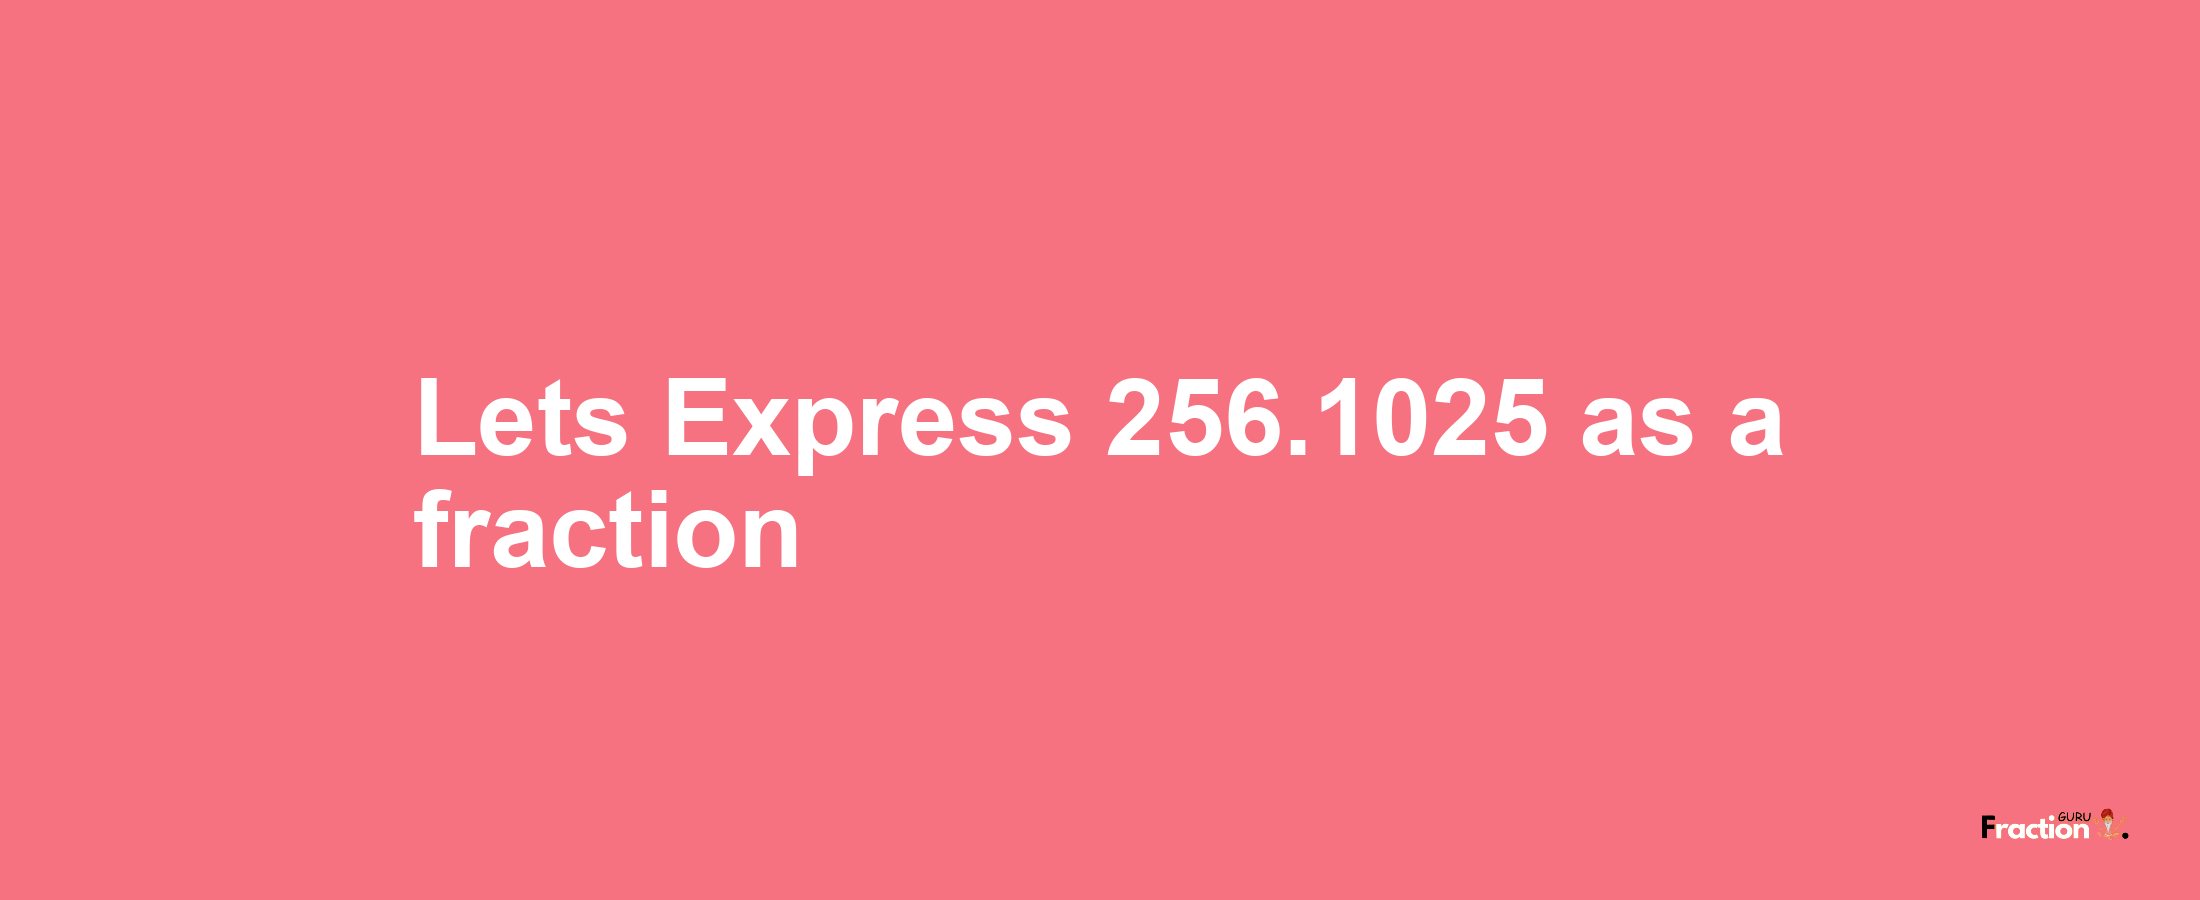 Lets Express 256.1025 as afraction